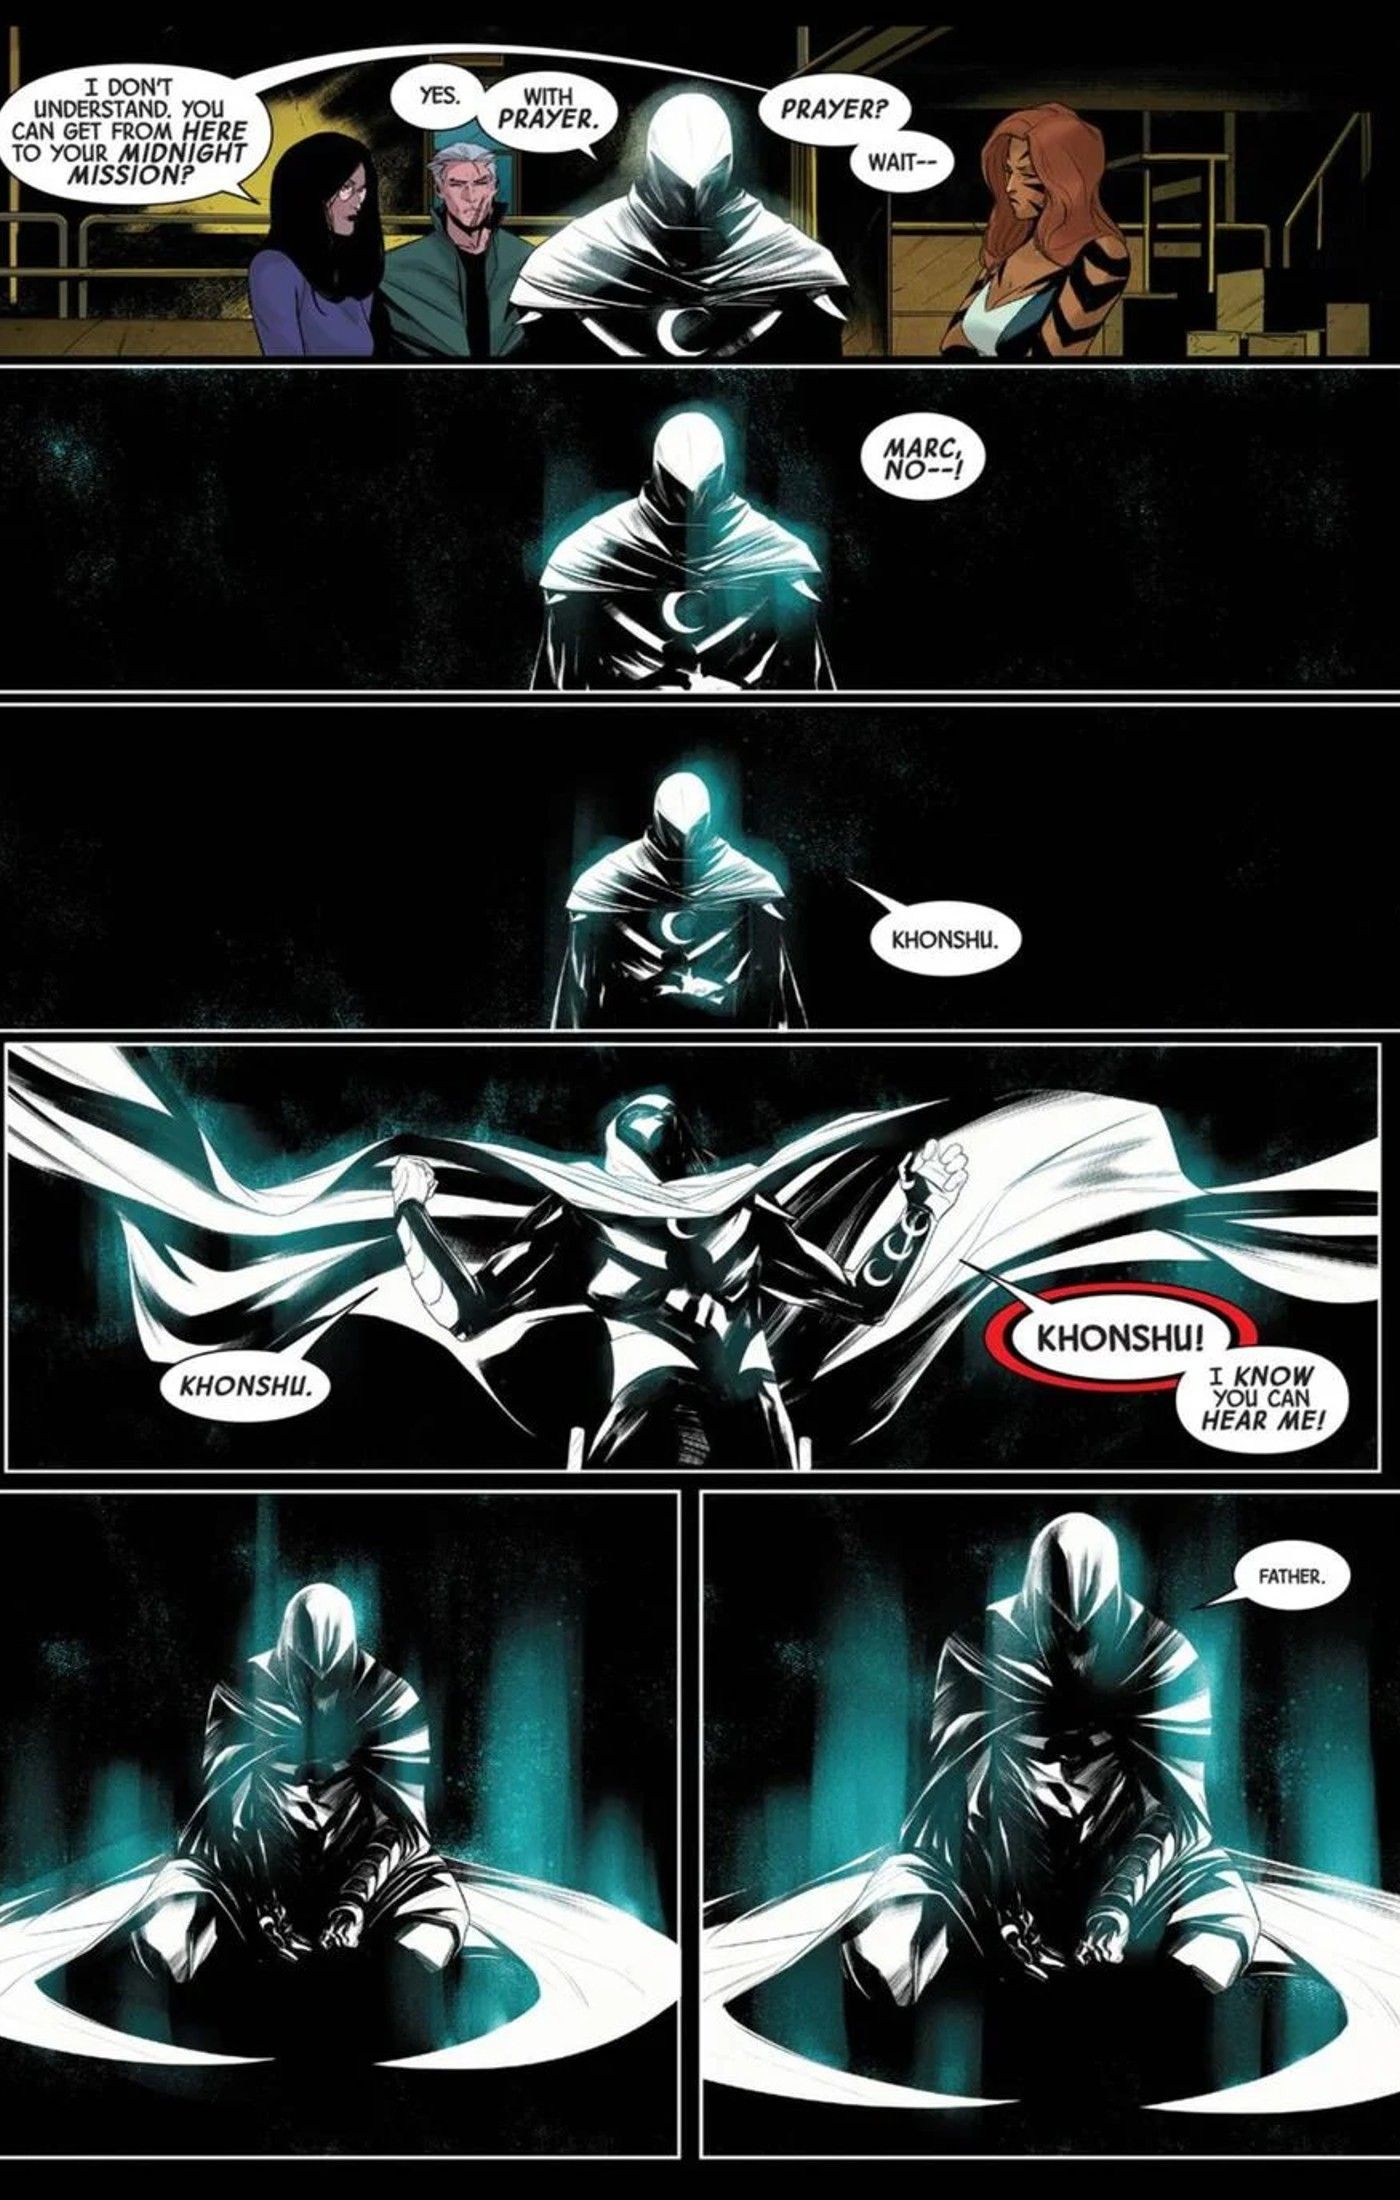 panels from Moon Knight #11